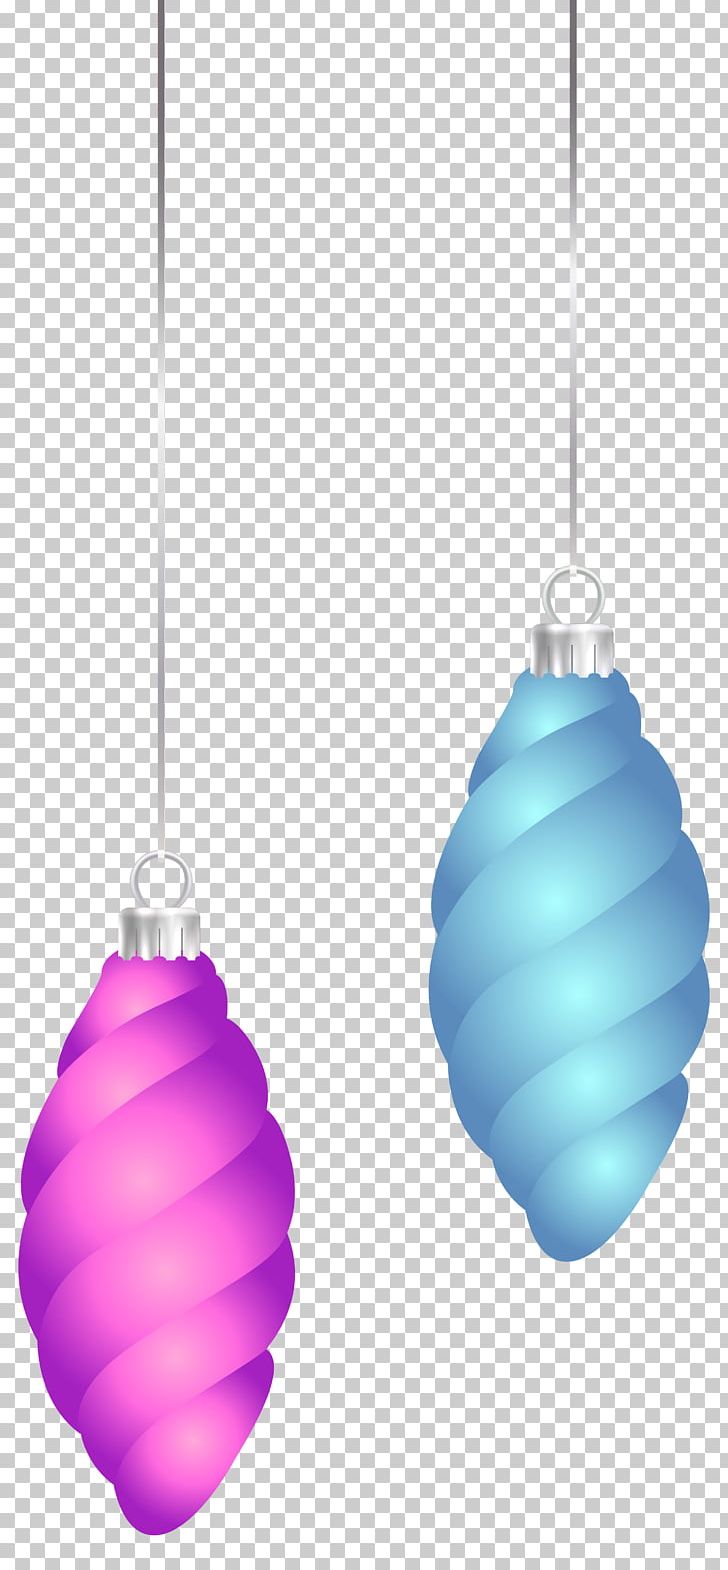 Christmas Ornament Christmas Decoration Lighting PNG, Clipart, Art, Ceiling, Ceiling Fixture, Christmas, Christmas Decoration Free PNG Download